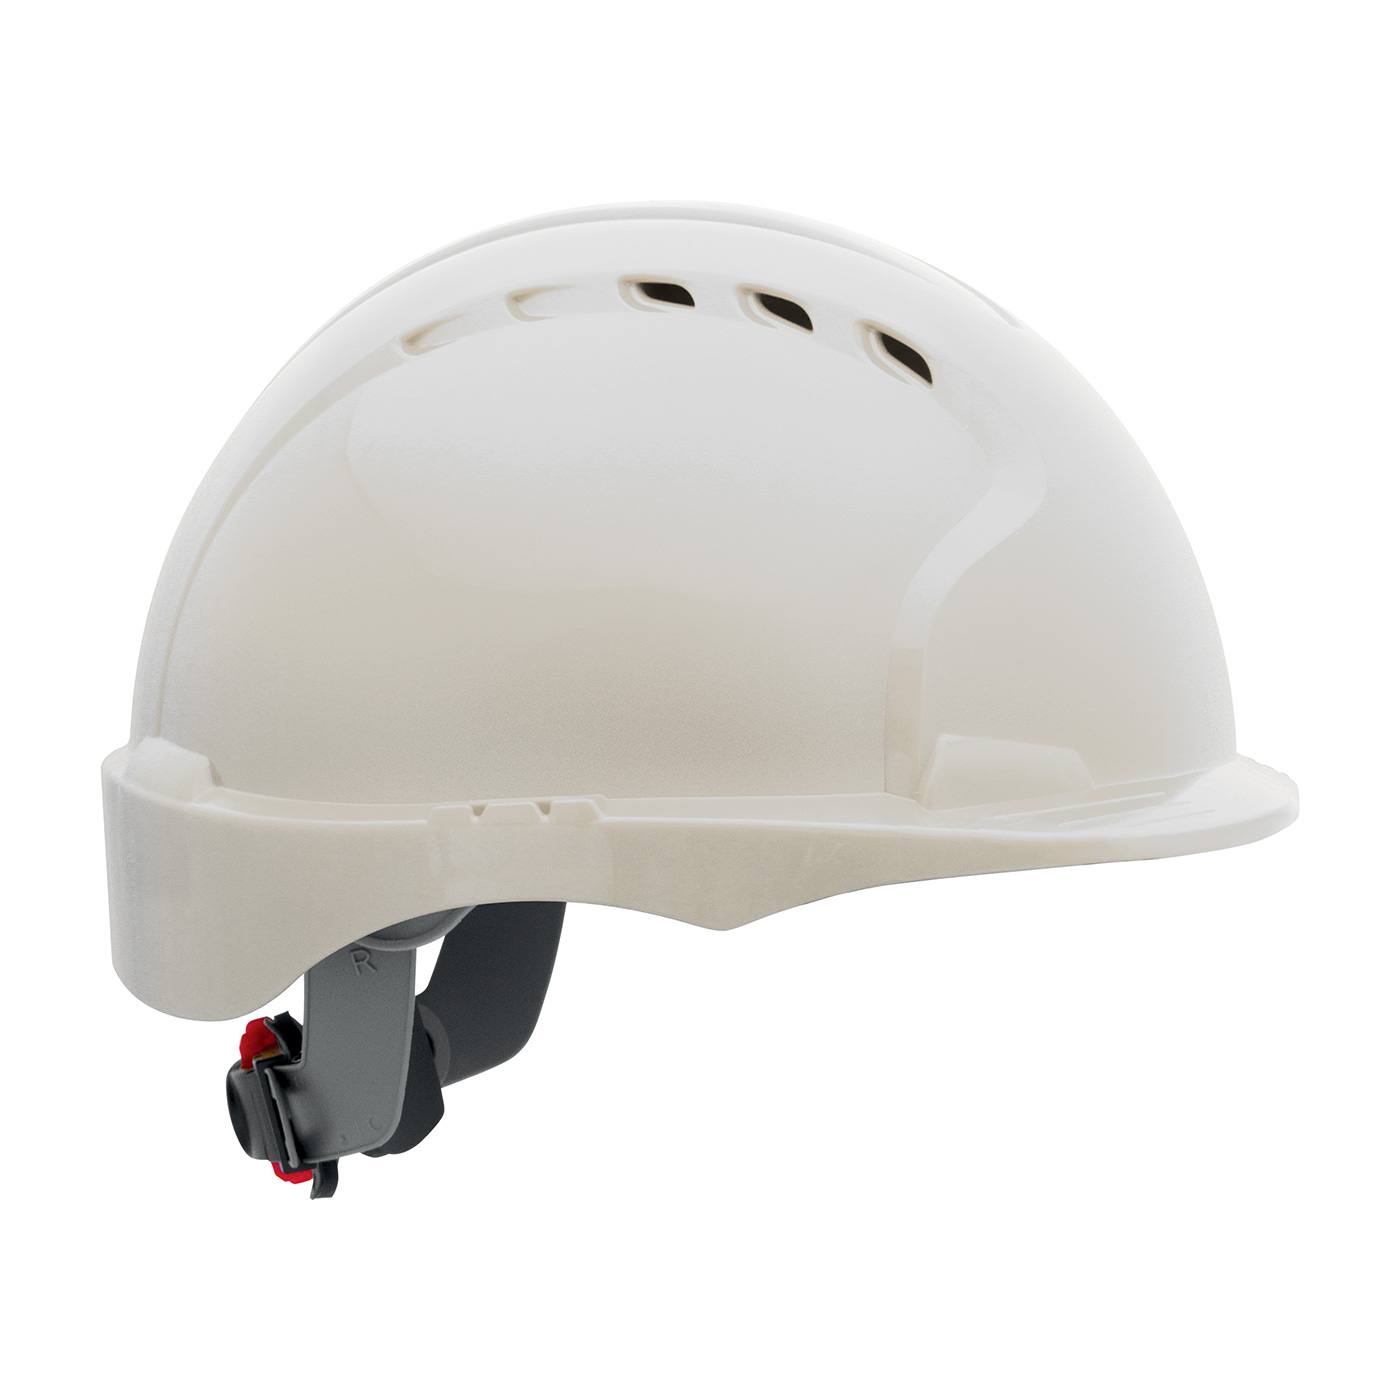 280-EV6151SV PIP® Evolution® Deluxe 6151 Vented, Short Brim Hard Hat with HDPE Shell, 6-Point Polyester Suspension and Wheel Ratchet Adjustment - White